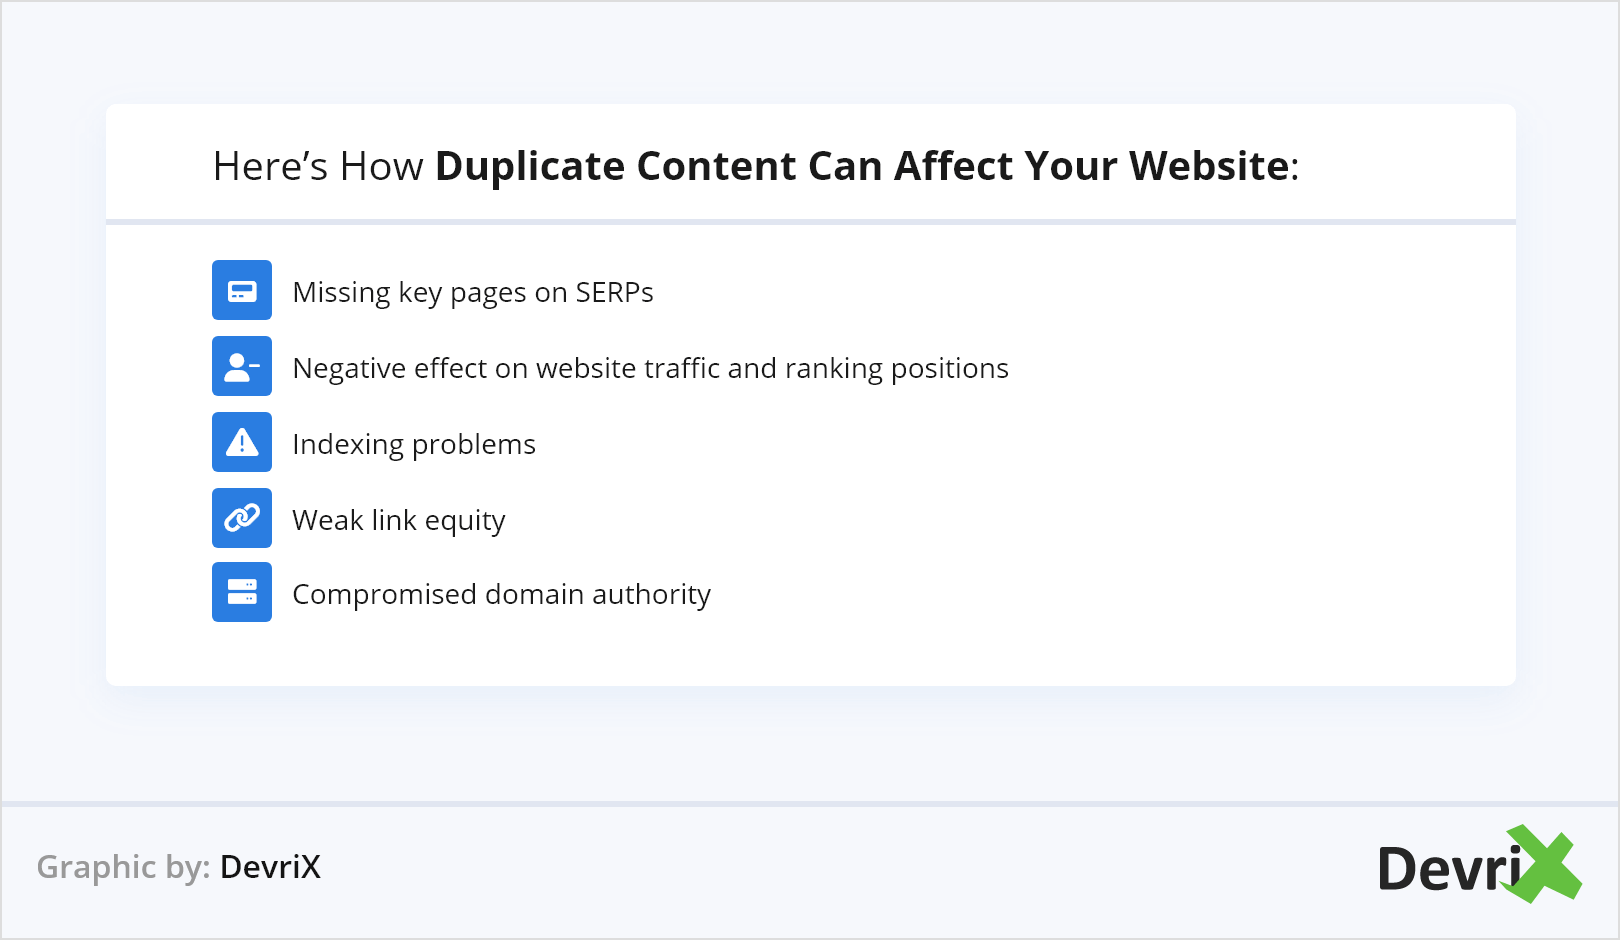 How Duplicate Content Can Affect Your Website